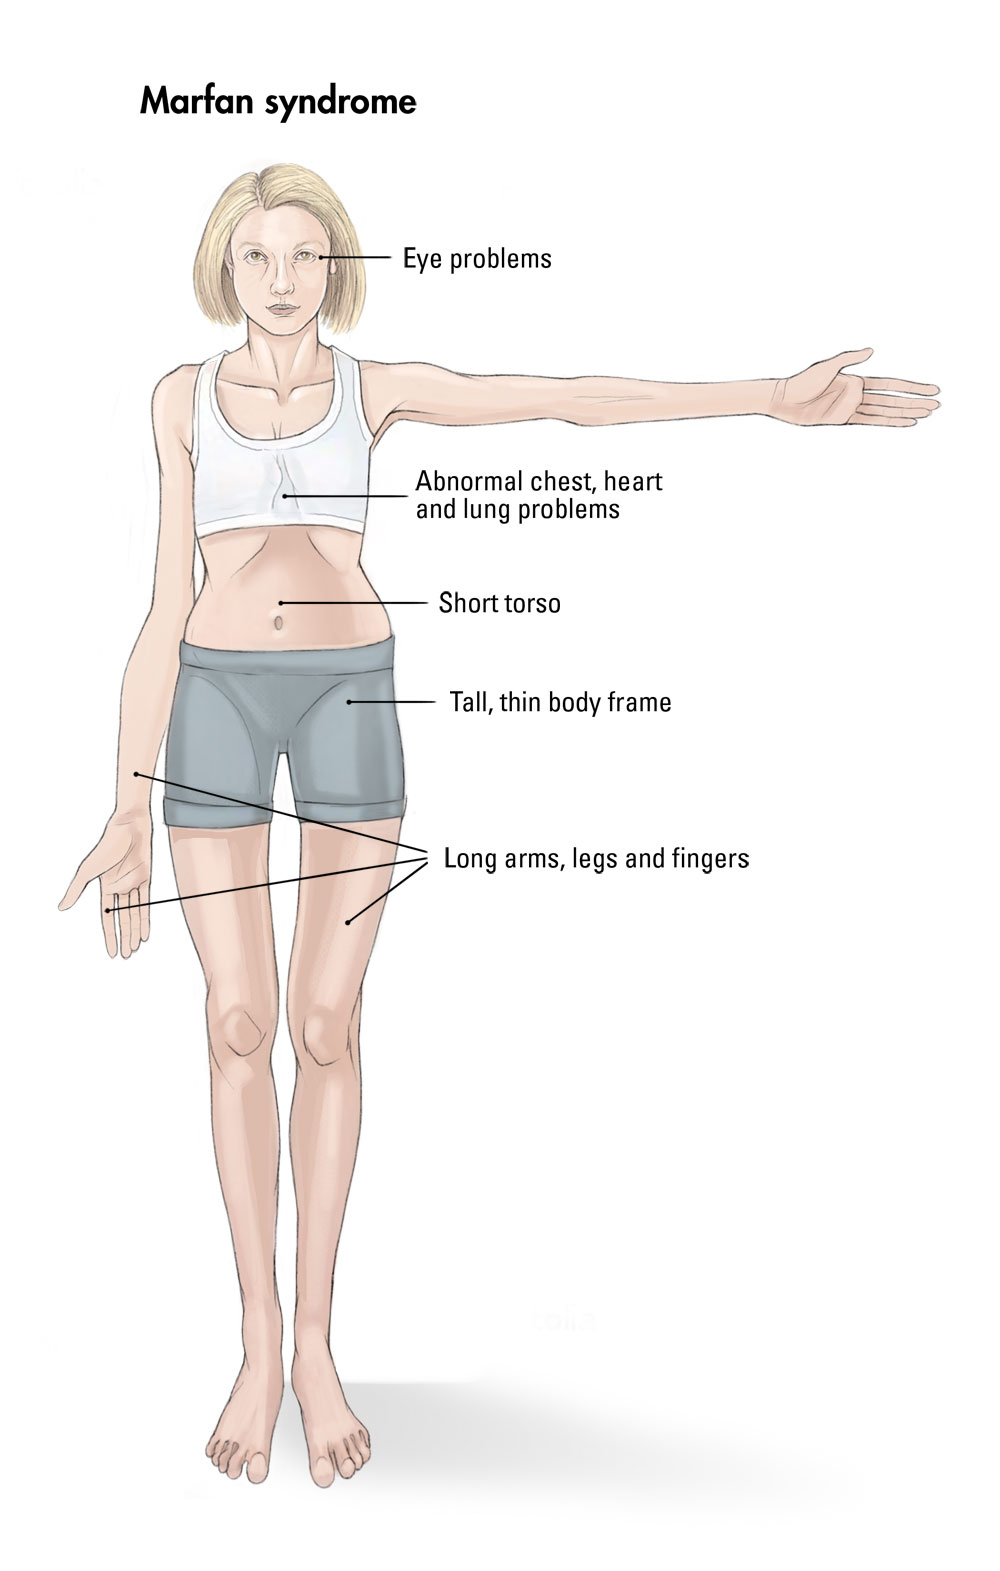 A drawing of a girl showing symptoms of marfan syndrome